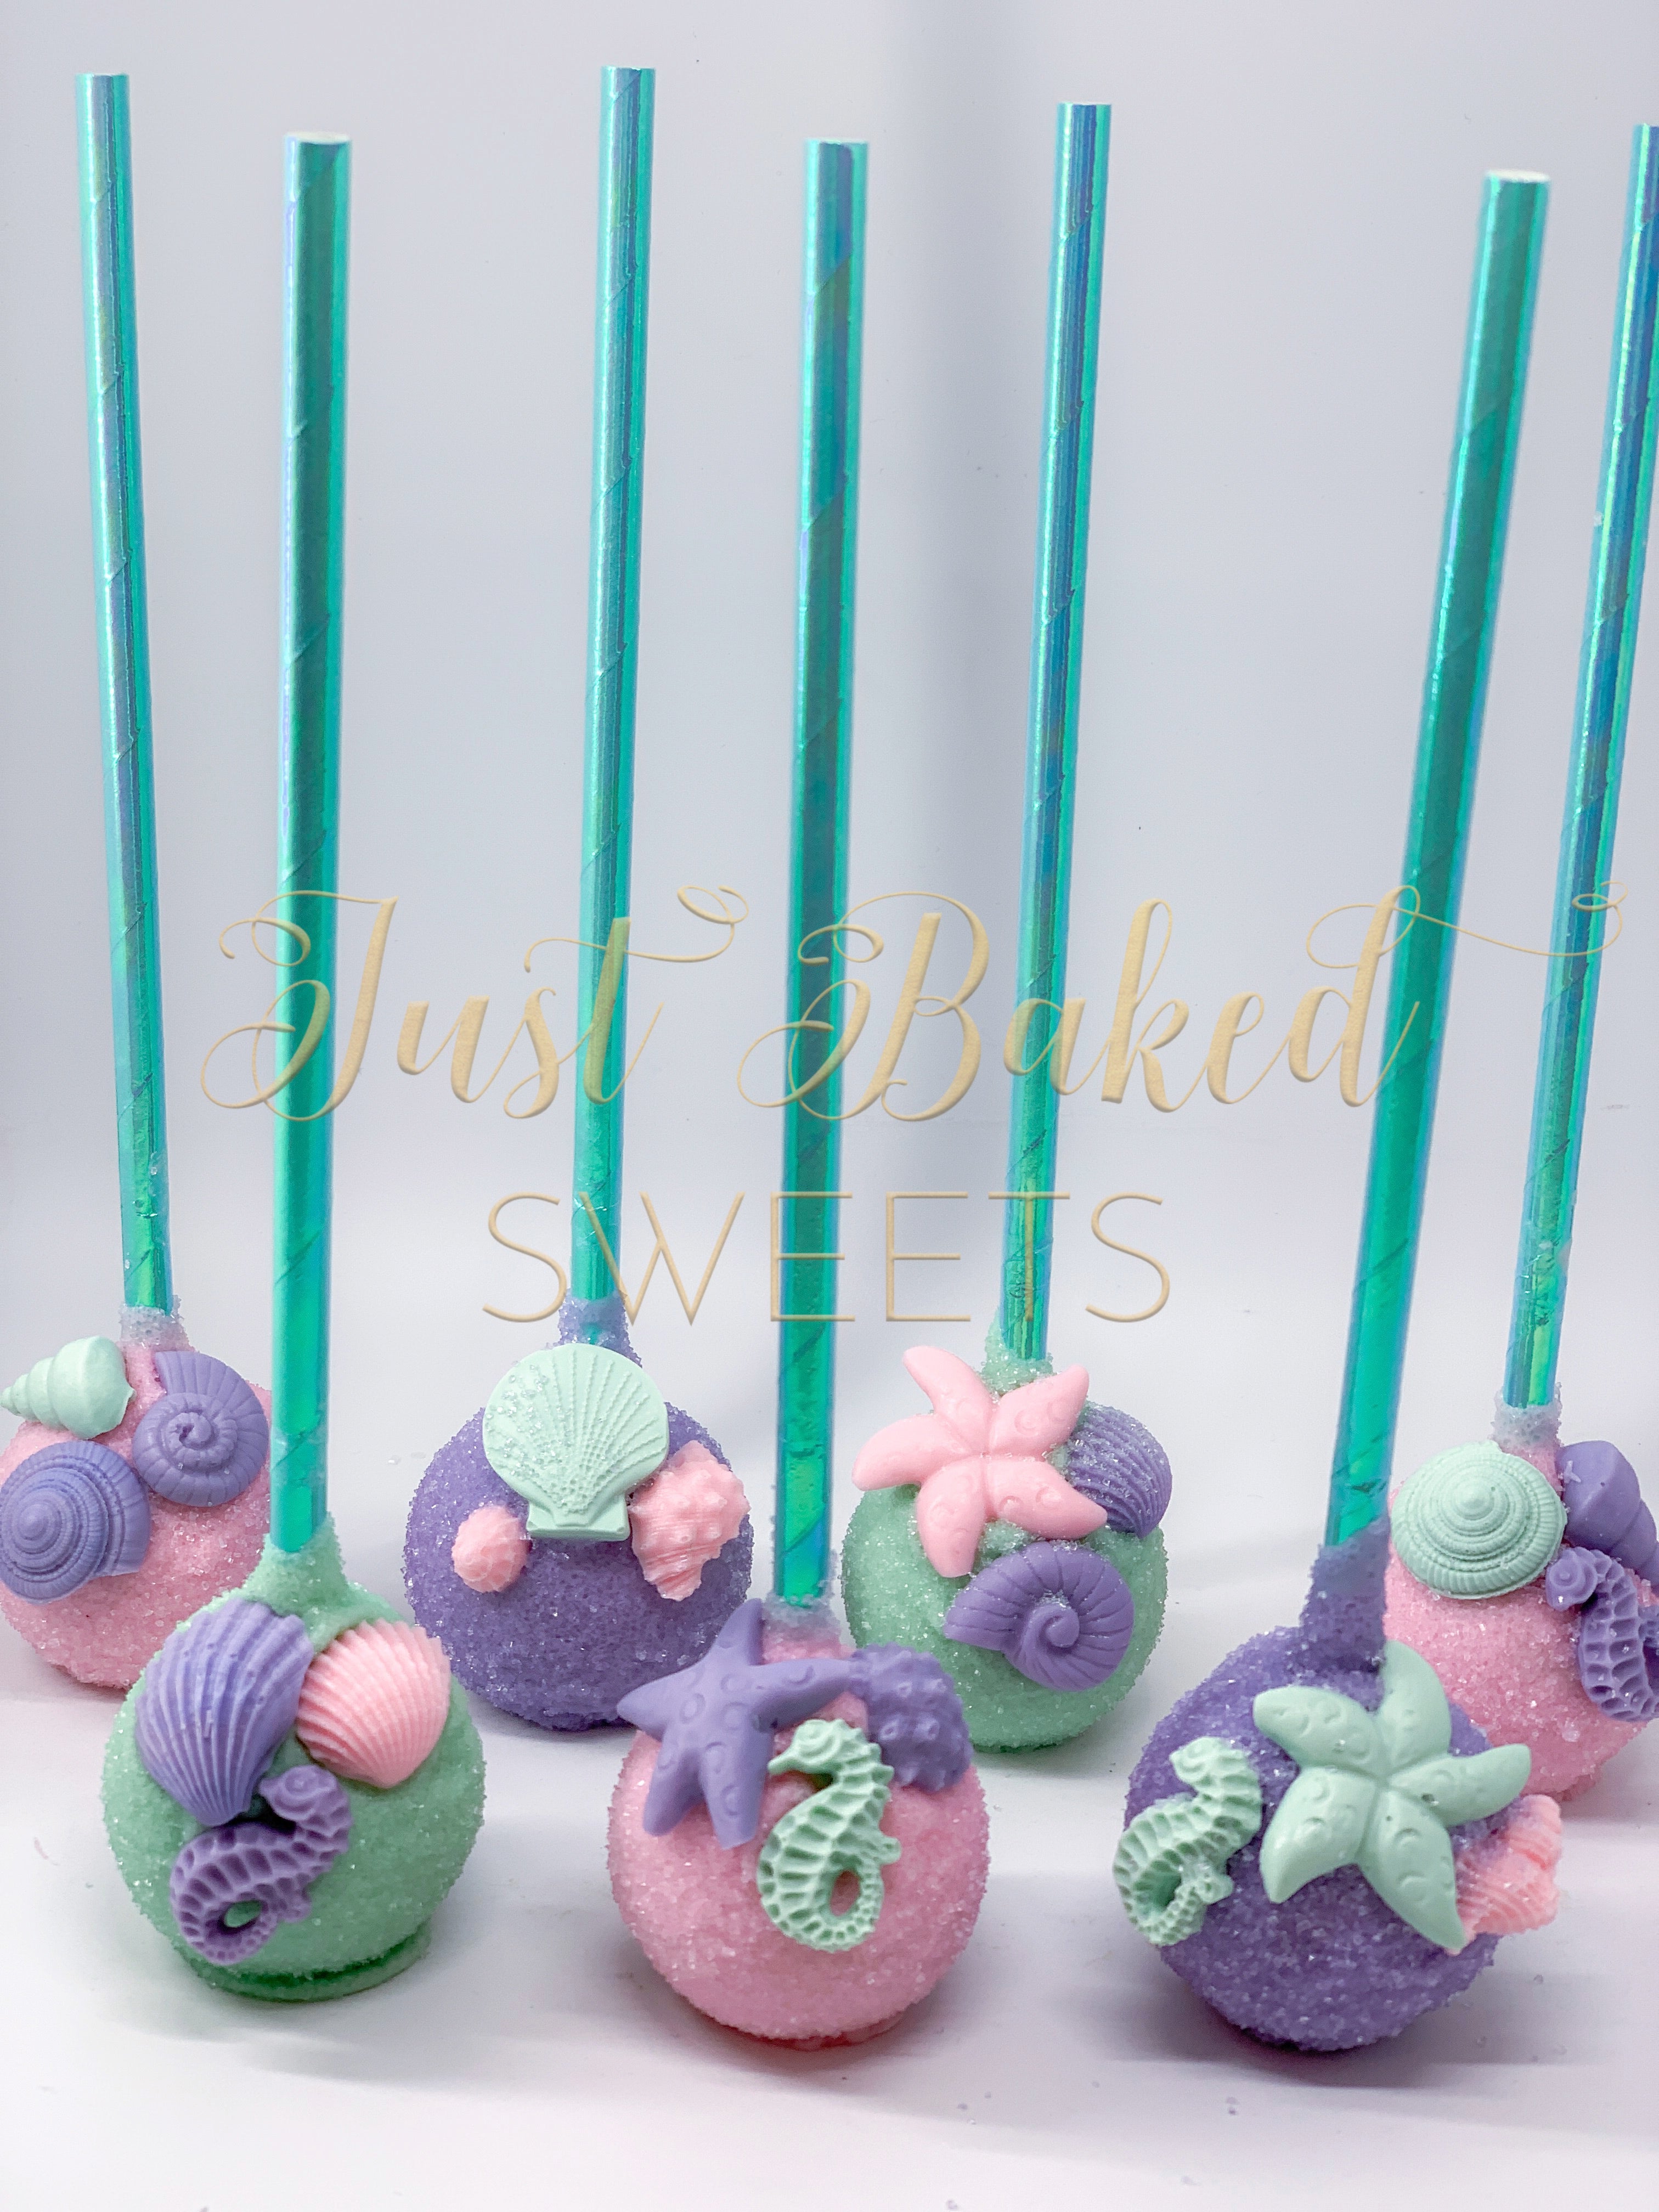 Under The Sea Cake Pops In Pink Lilac And Mint Green Just Baked Sweets